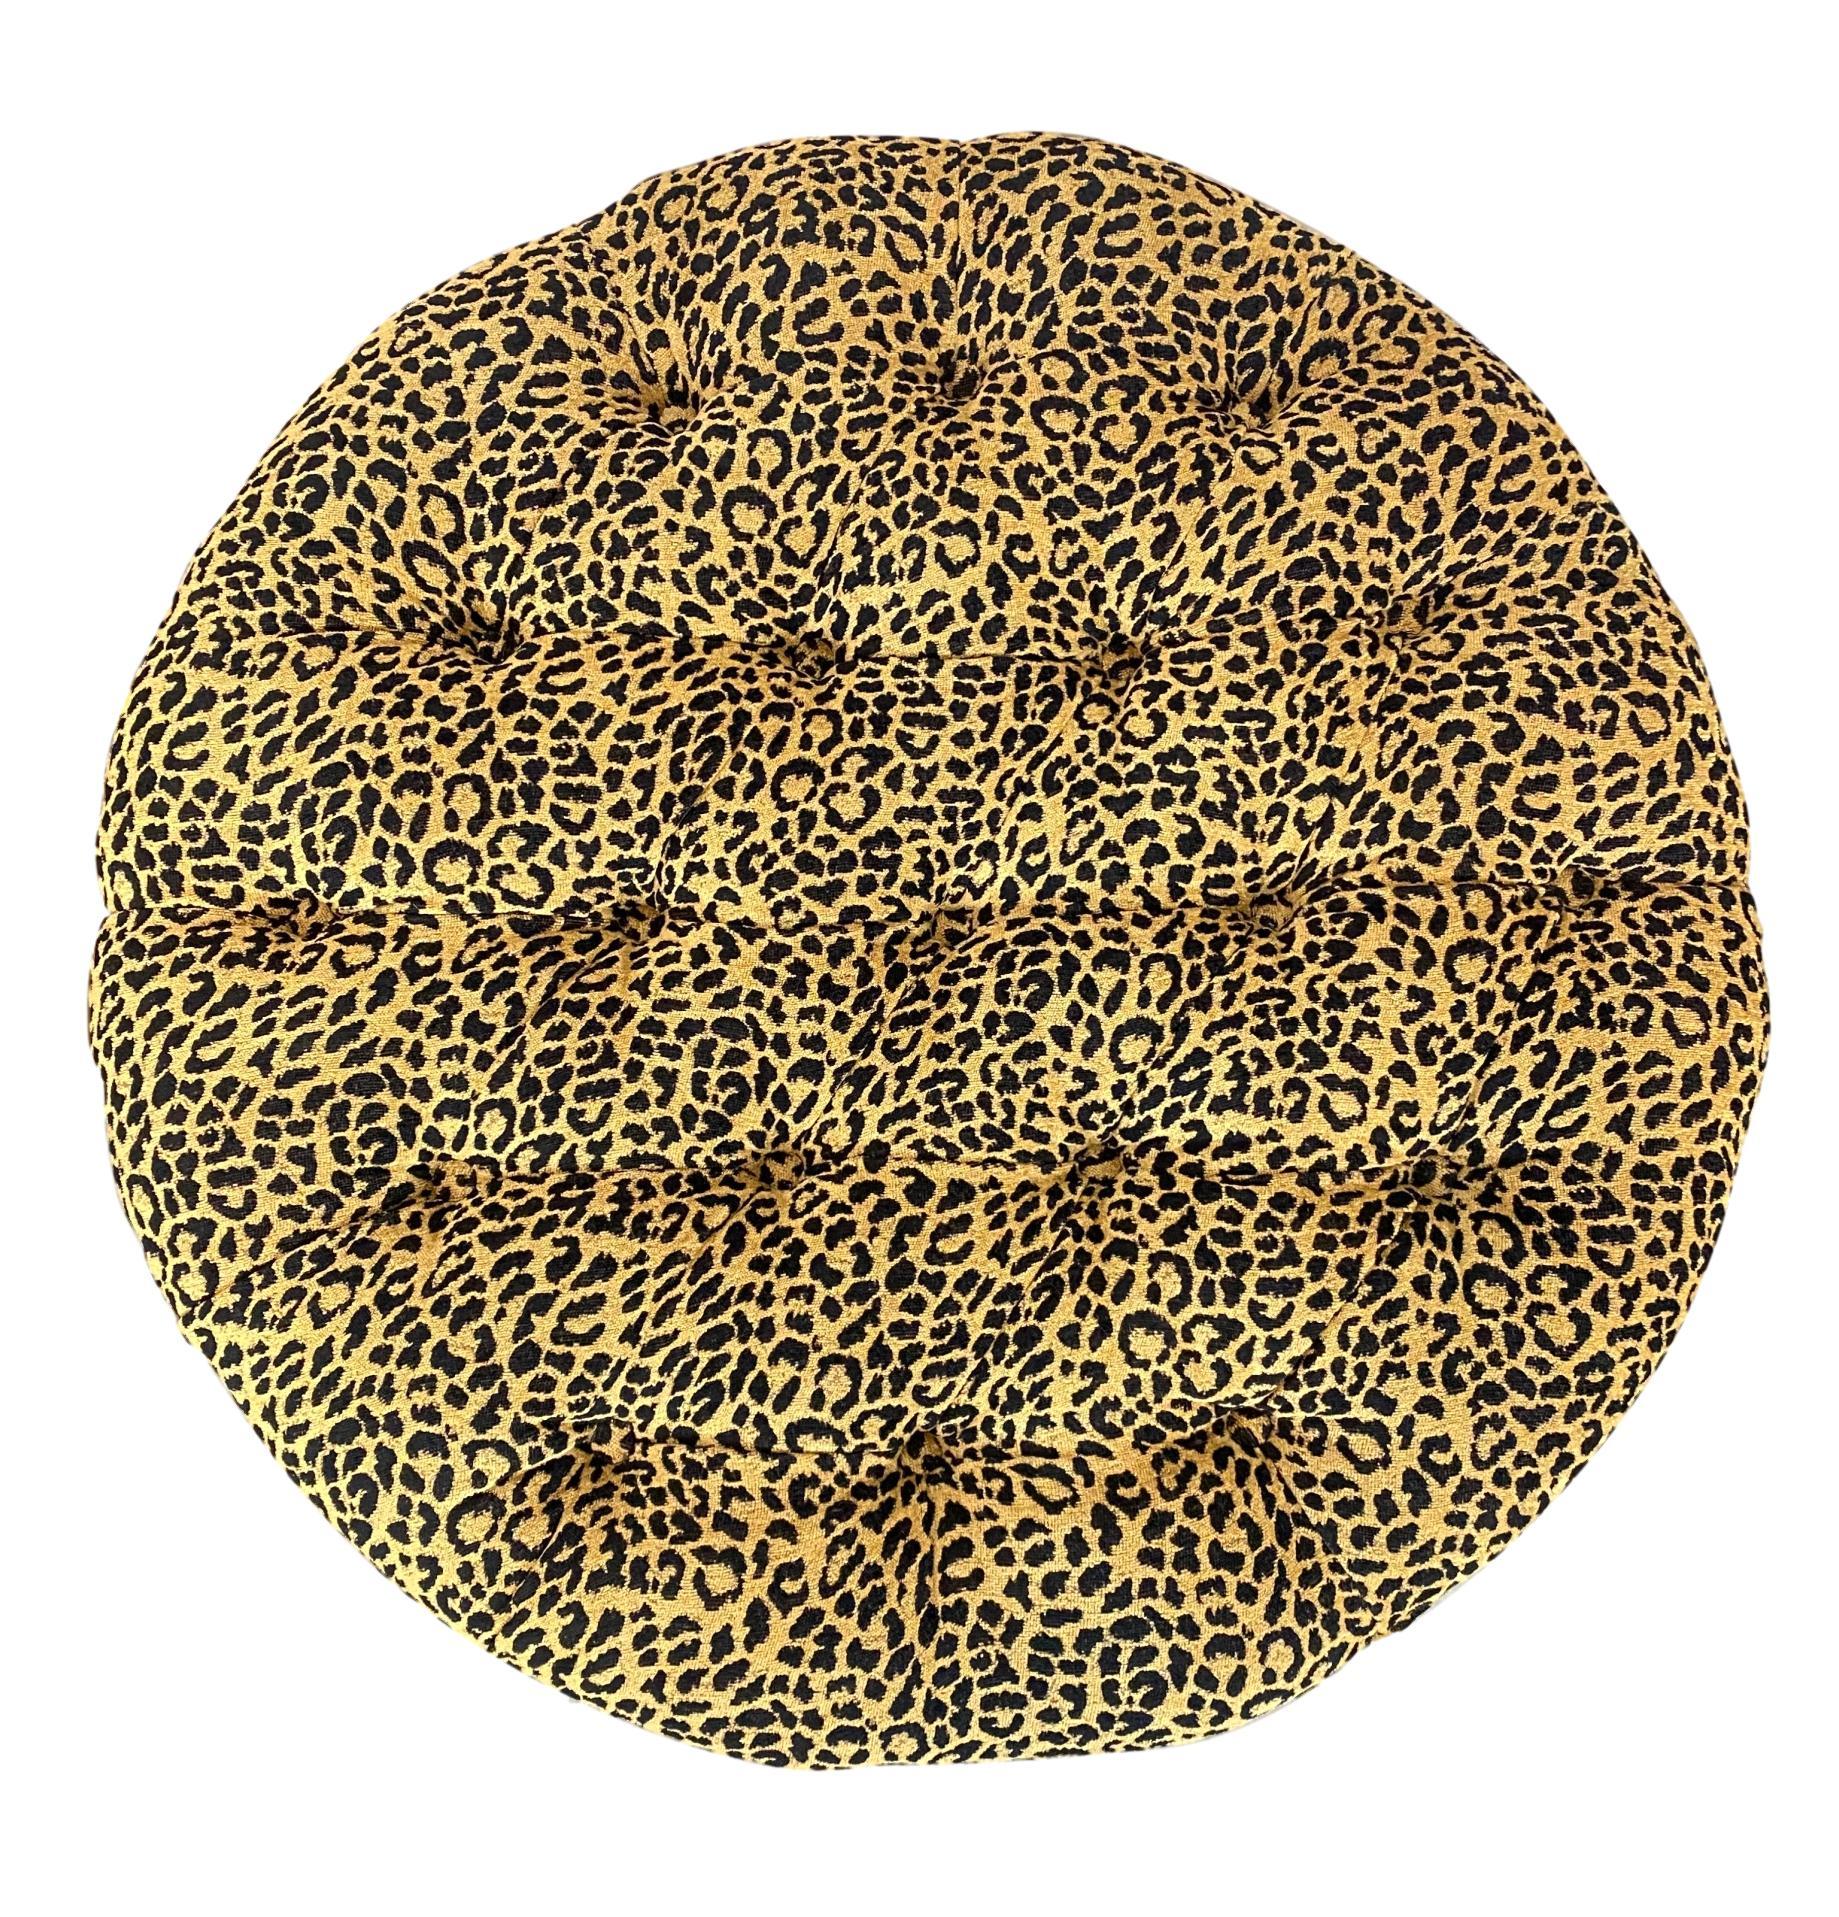 Round ottoman 33-in diameter, newly upholstered in designer leopard print chenille, button-tufted on castors.